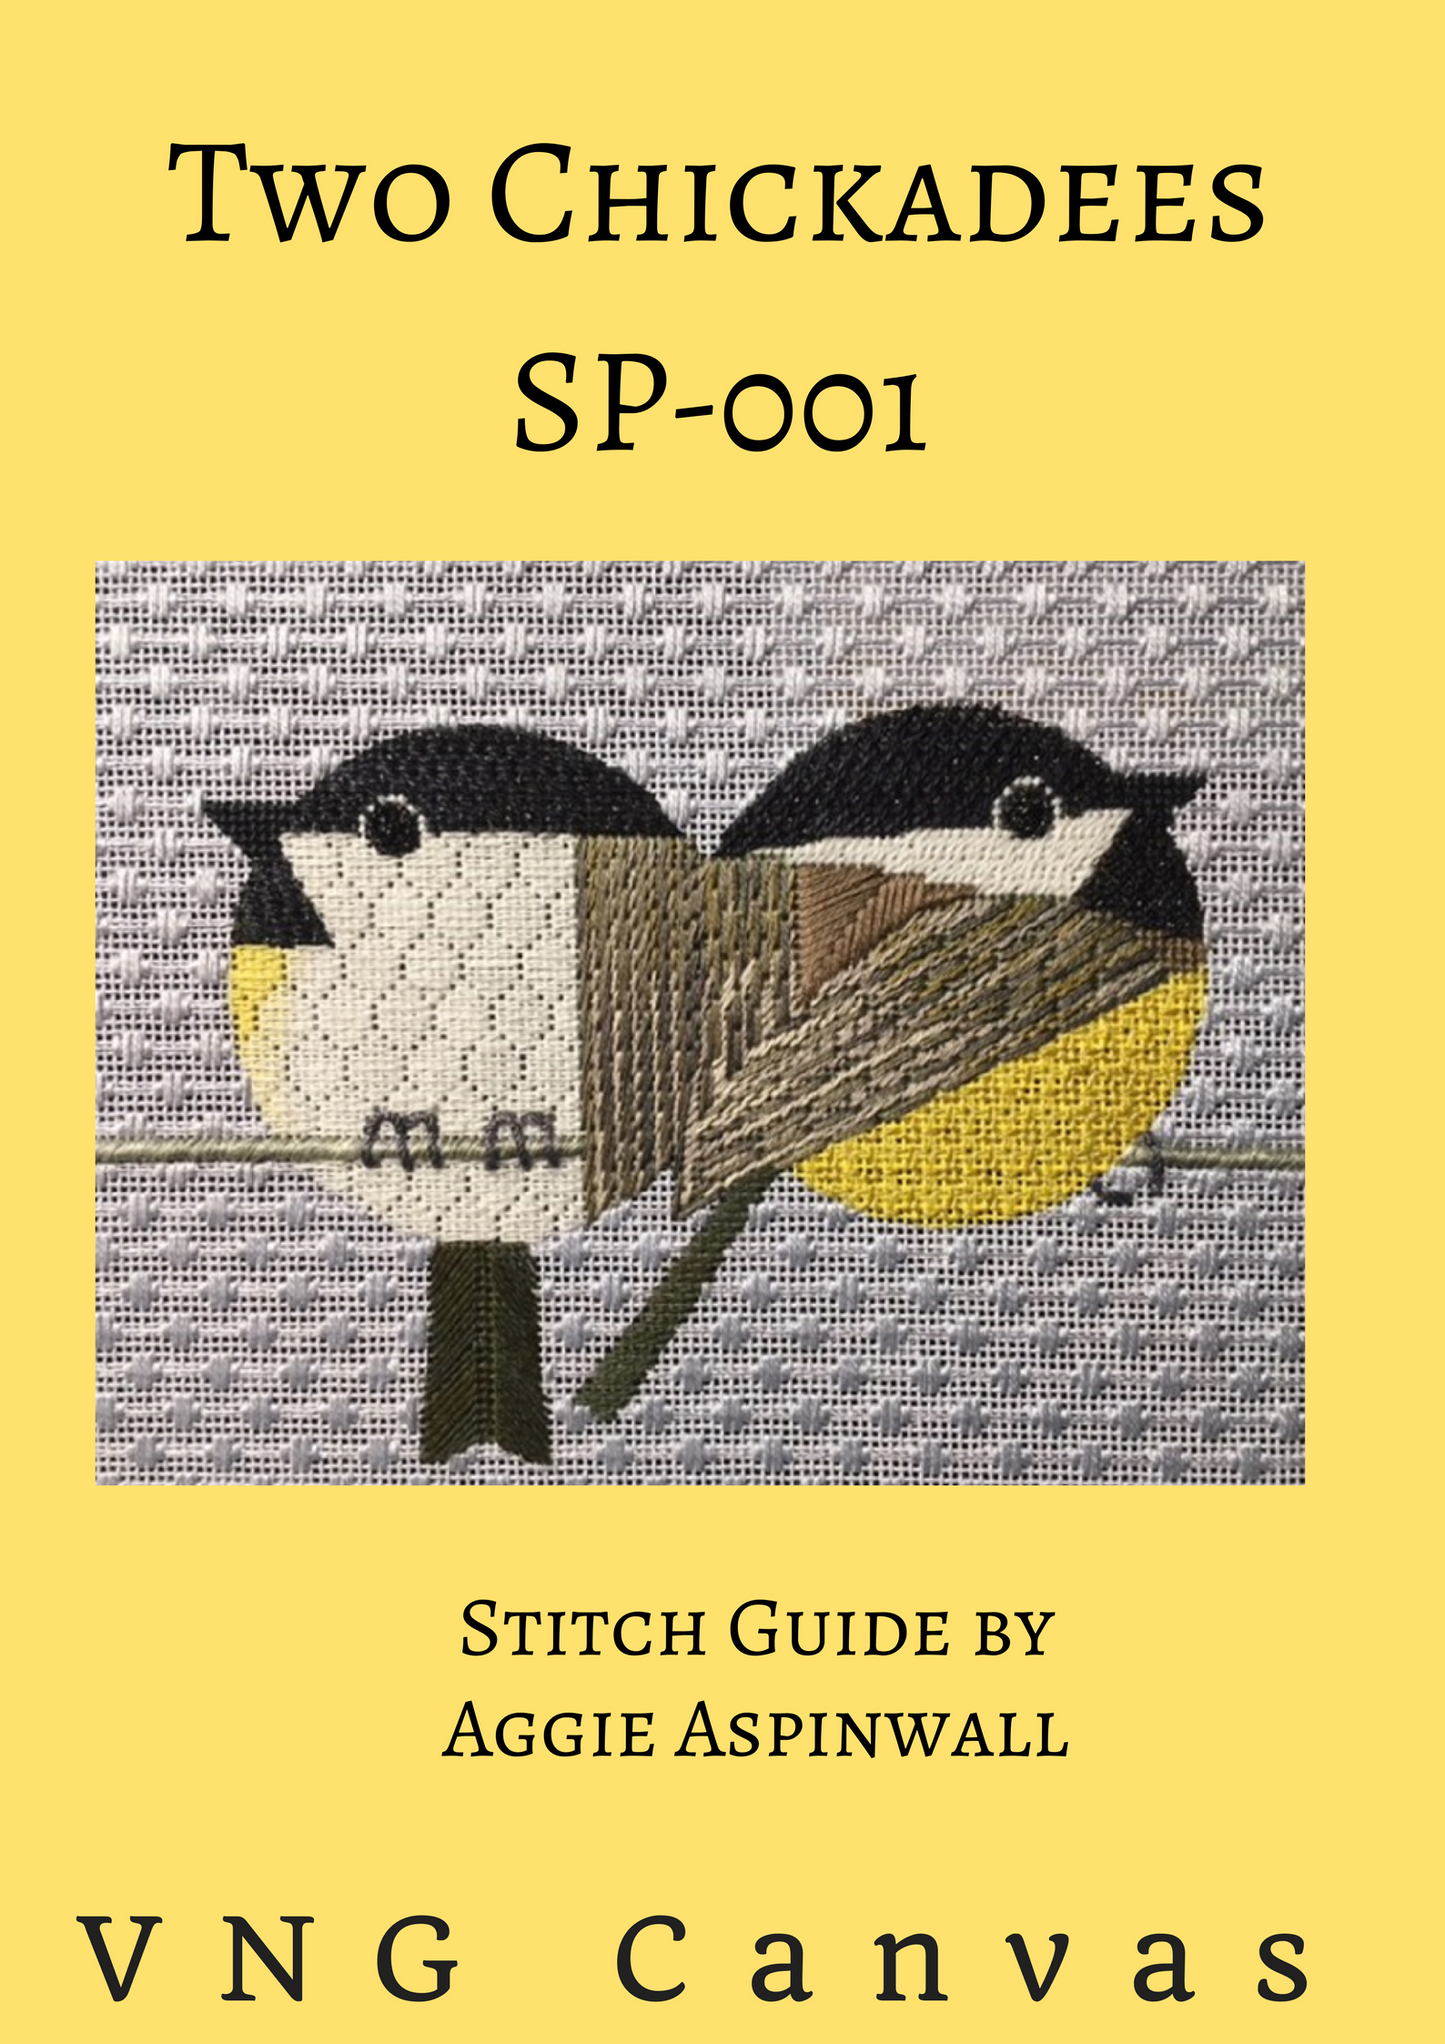 Two Chickadees Stitch Guide